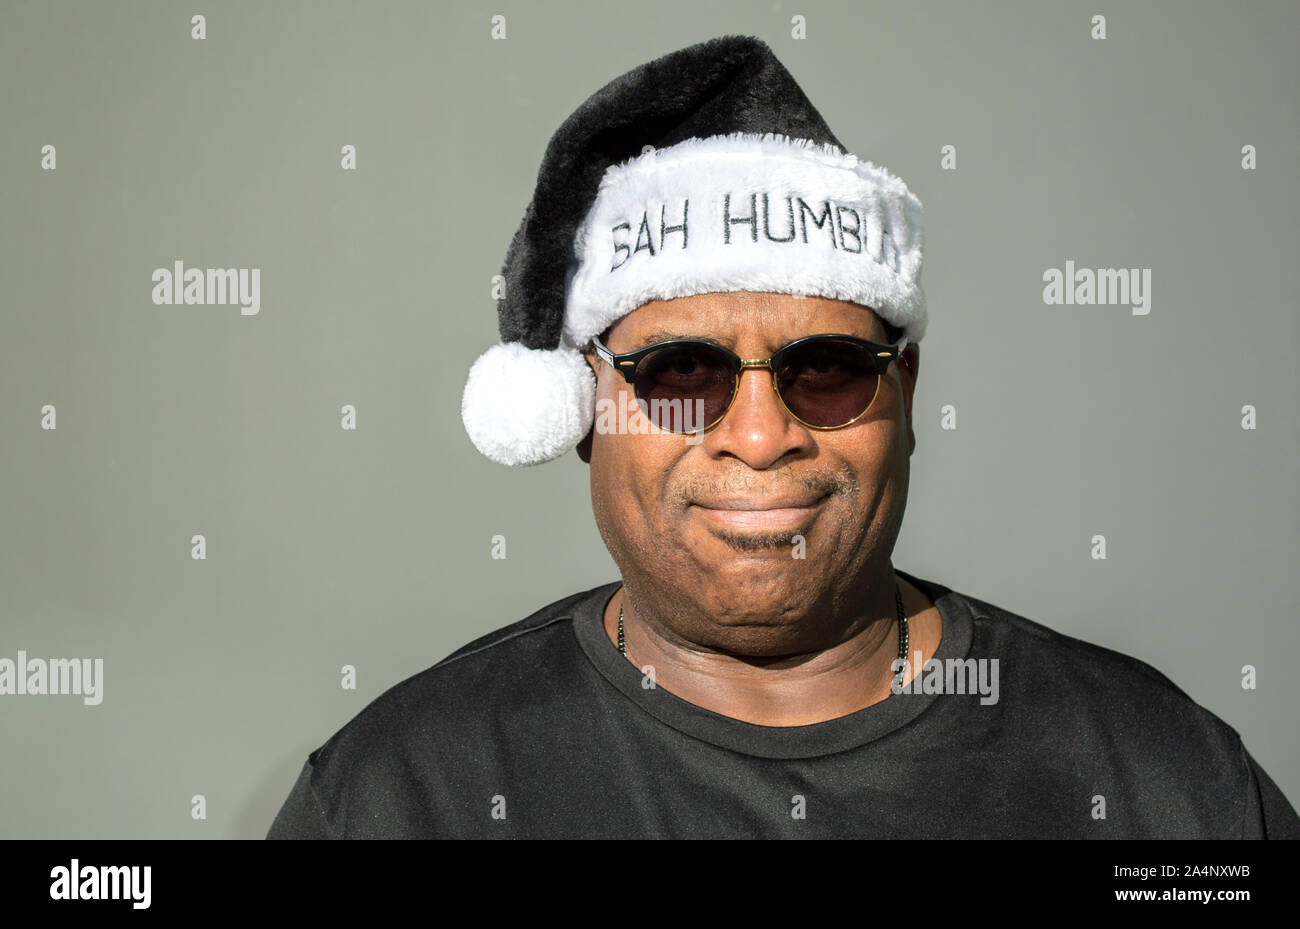 cranky African American man wearing a black and white Bah Humbug hat with a pom pom against a solid background Stock Photo